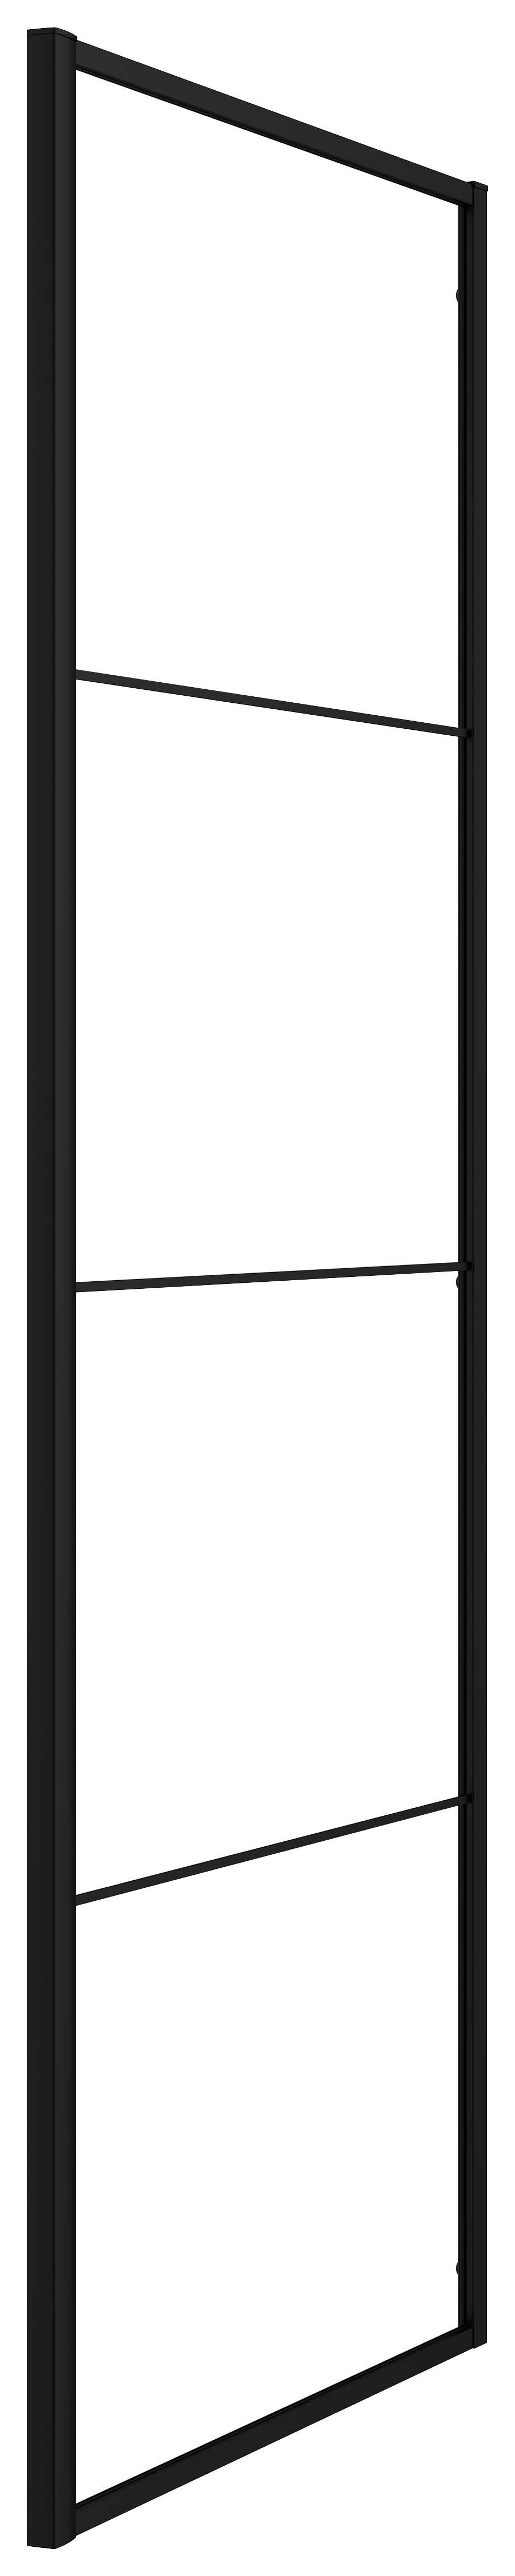 Nexa By Merlyn Hoxton 8mm Black Side Panel Only for Hoxton Hinge & Inline Door - Various Sizes